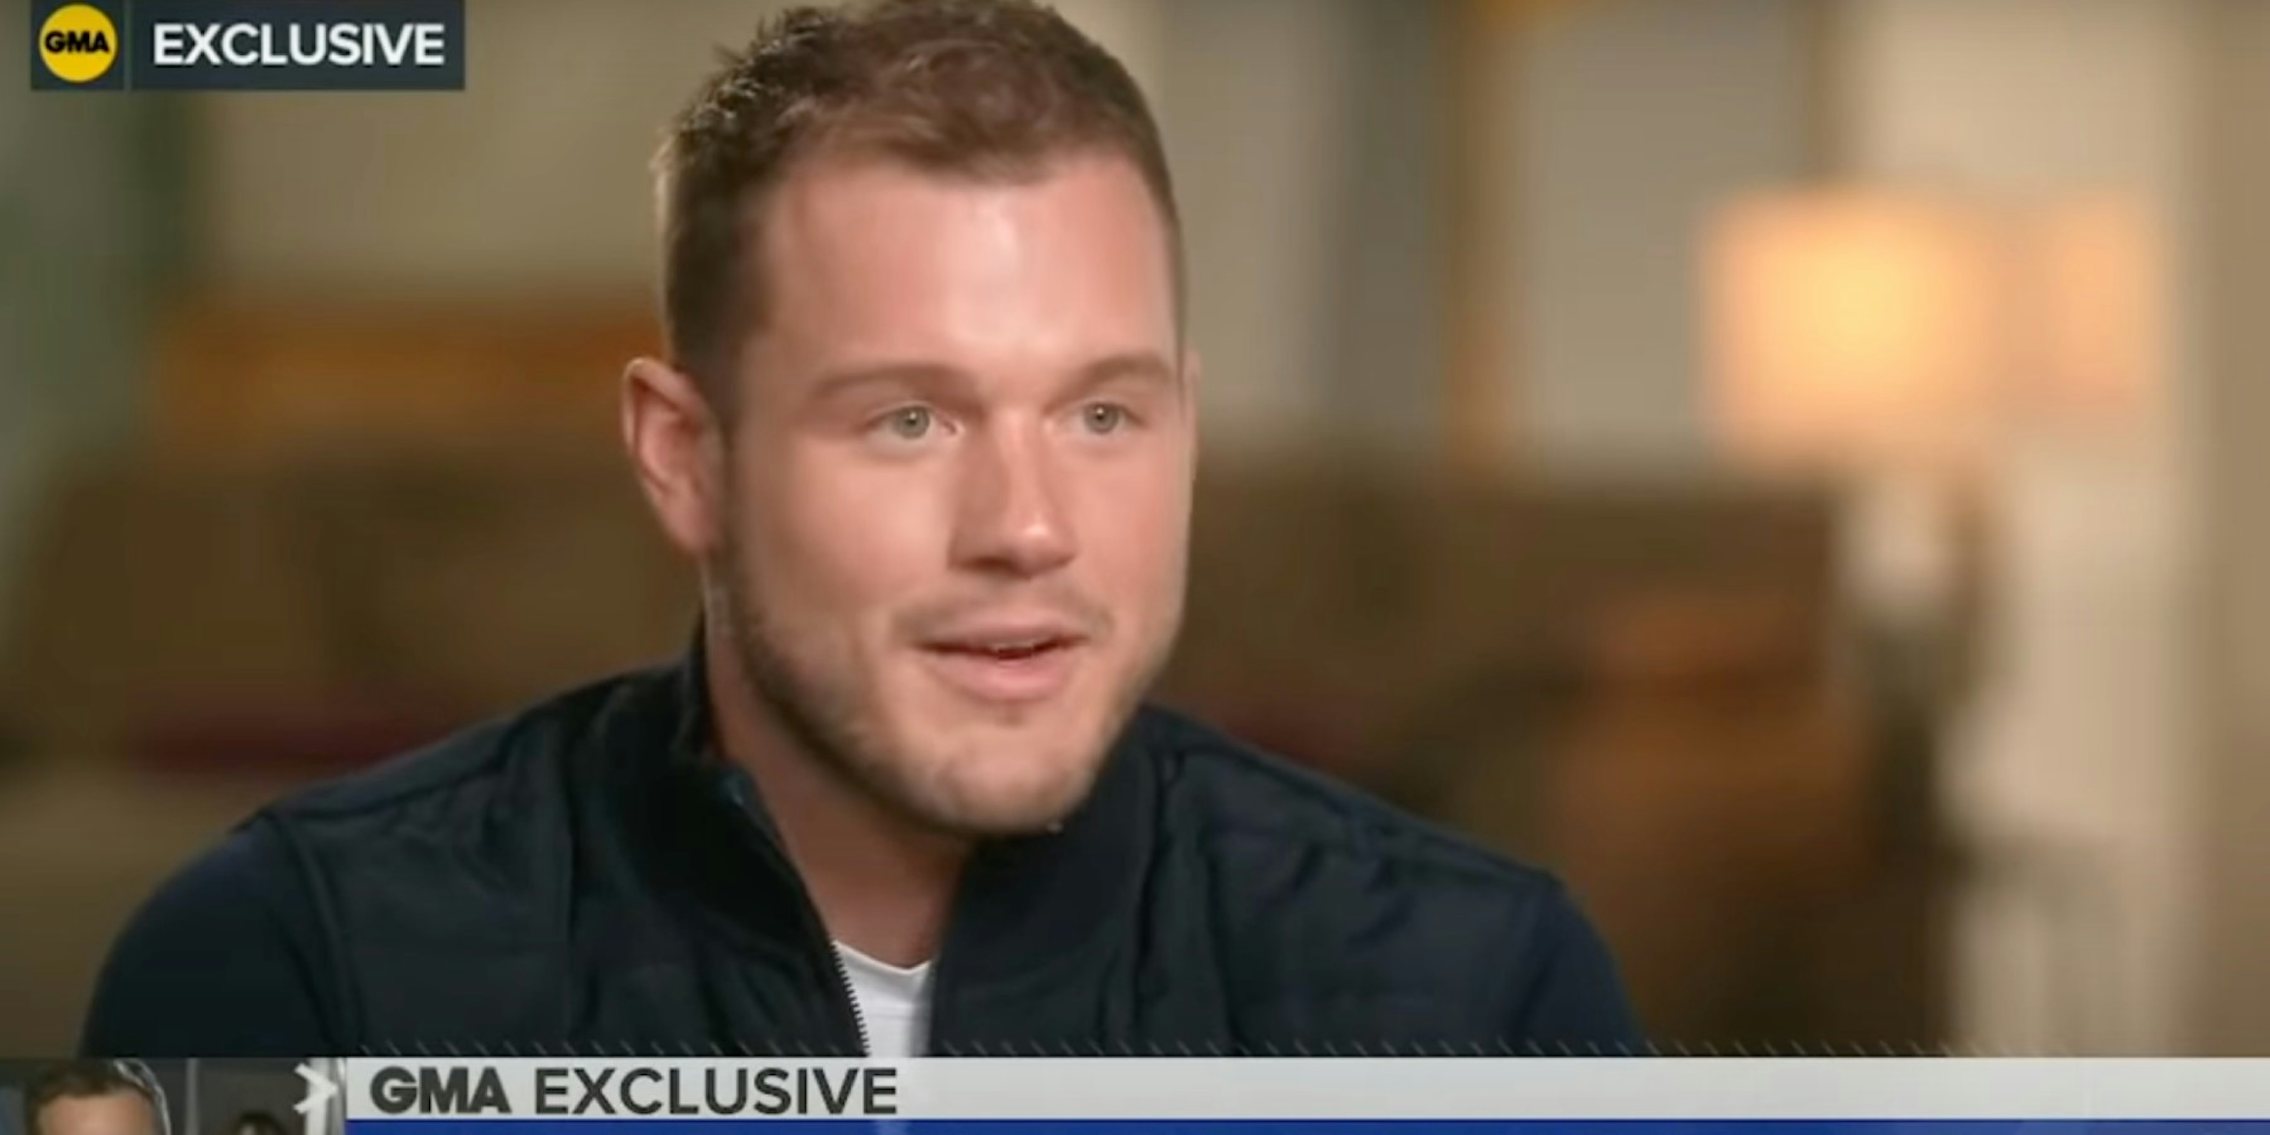 Colton Underwood came out as gay in an interview